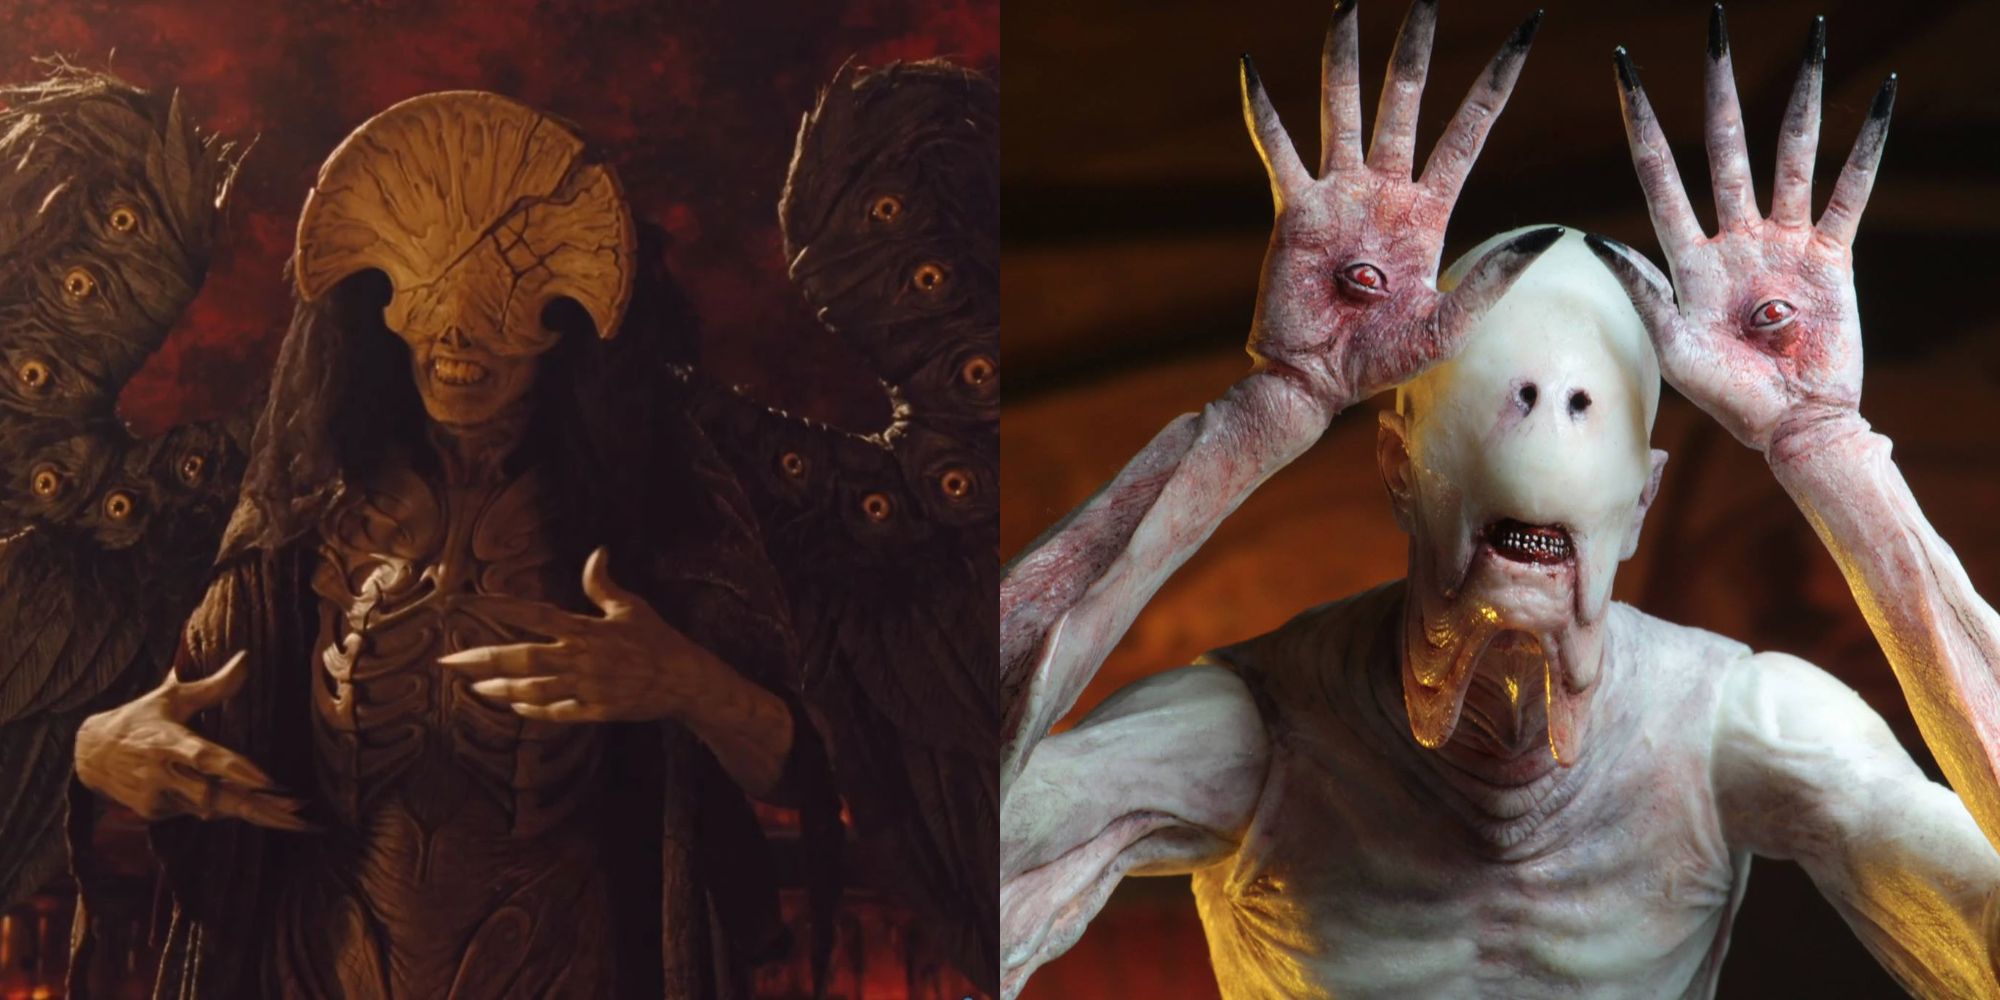 The Angel of Death from Hellboy 2 and The Pale Man from Pan's Labyrinth